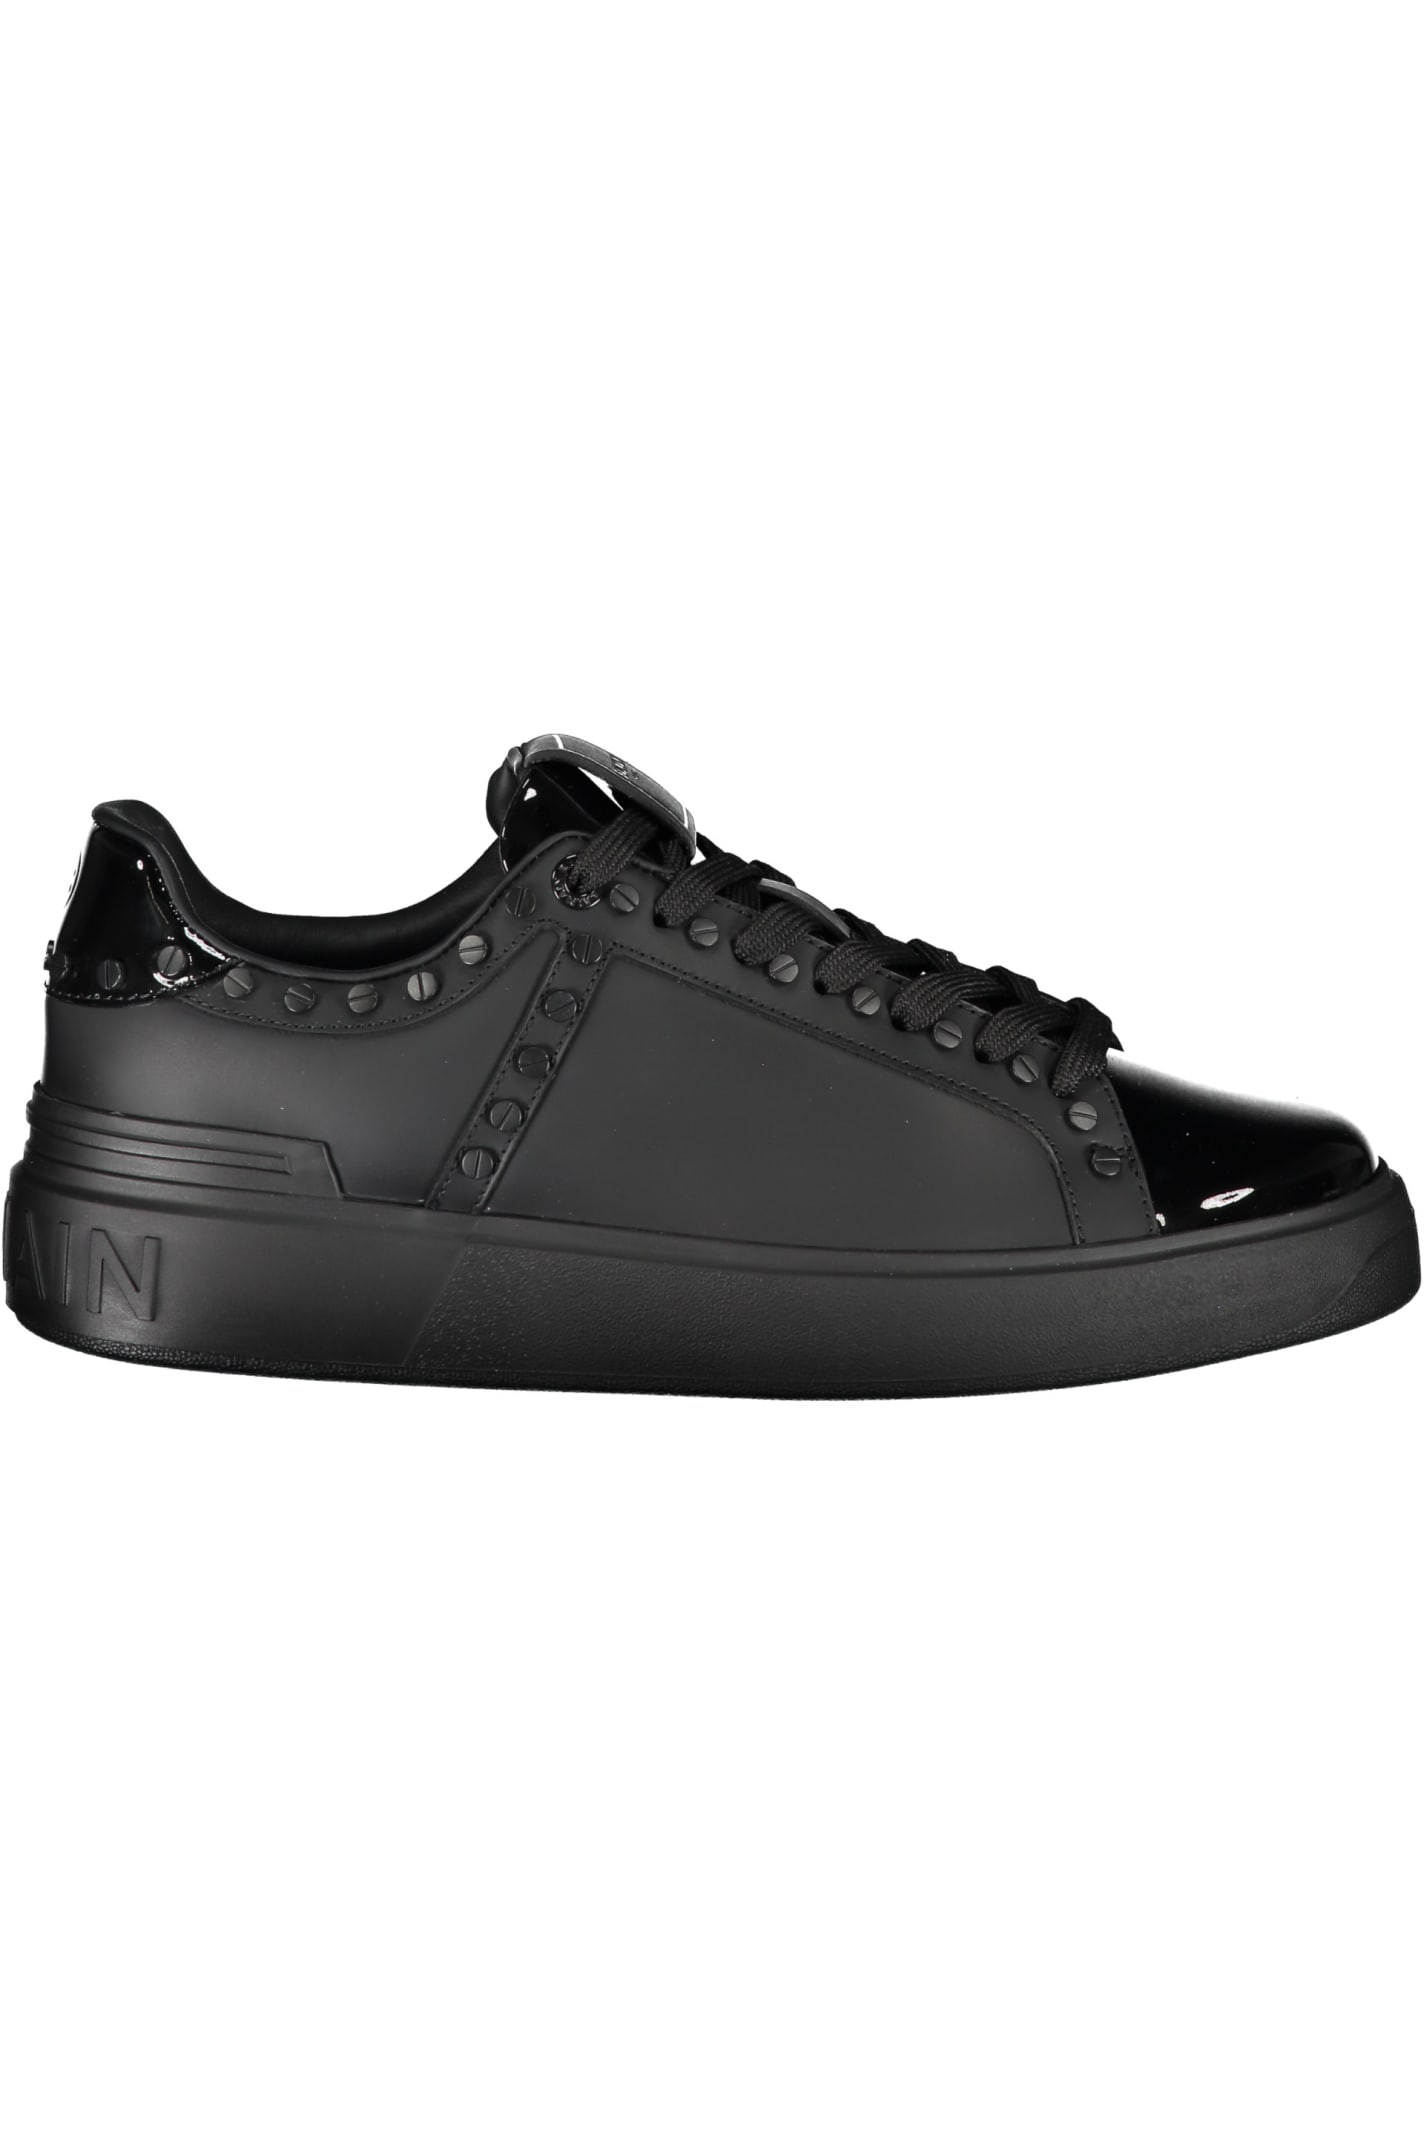 Balmain Leather Trainers In Black